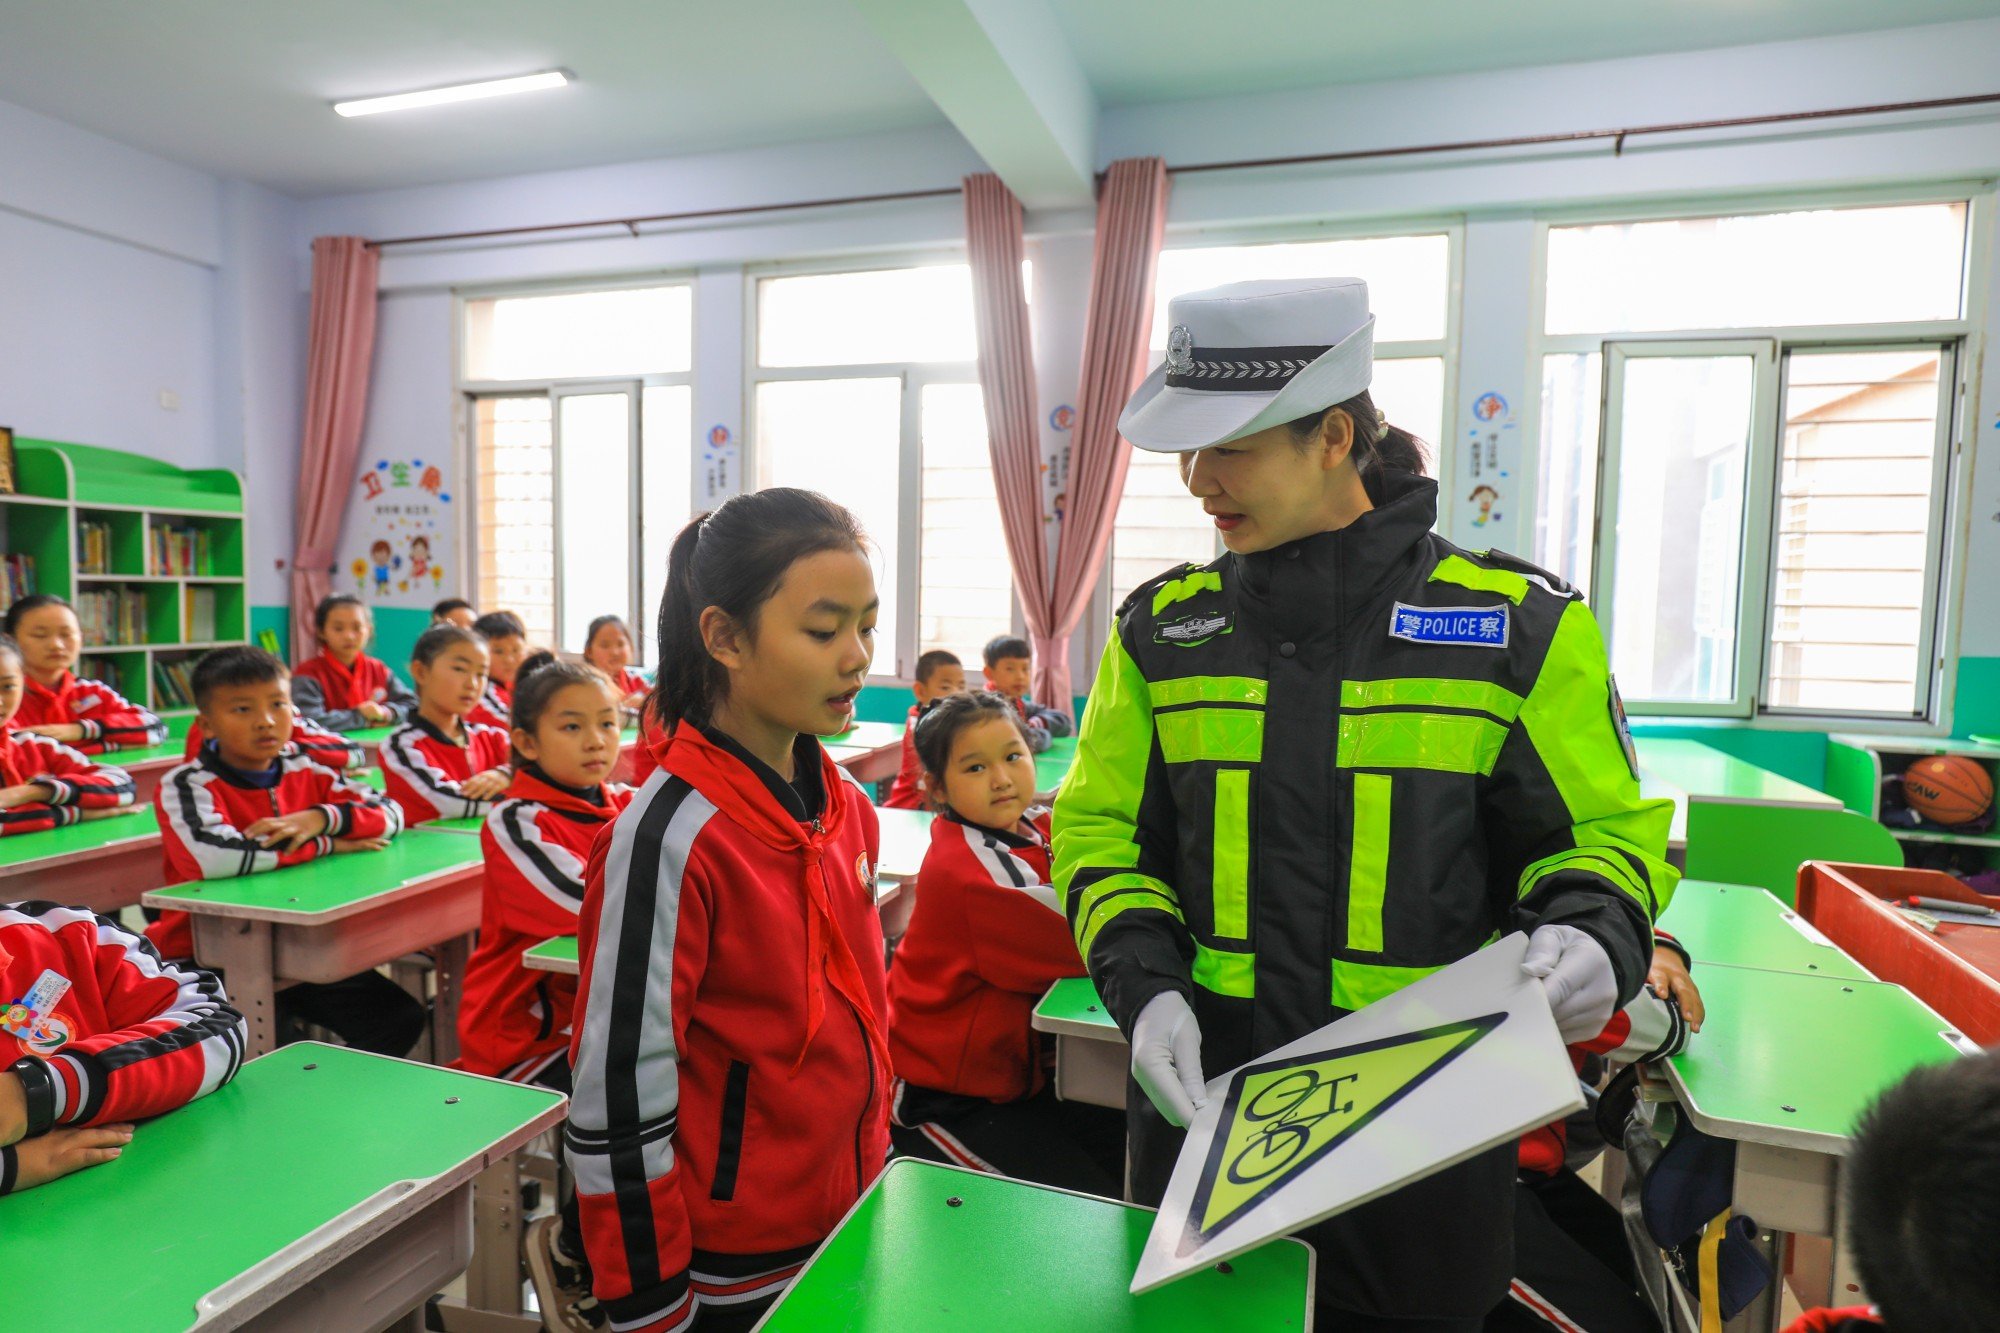 A police officer conducts a road safety lesson in a primary school classroom in China. Photo: Shutterstock